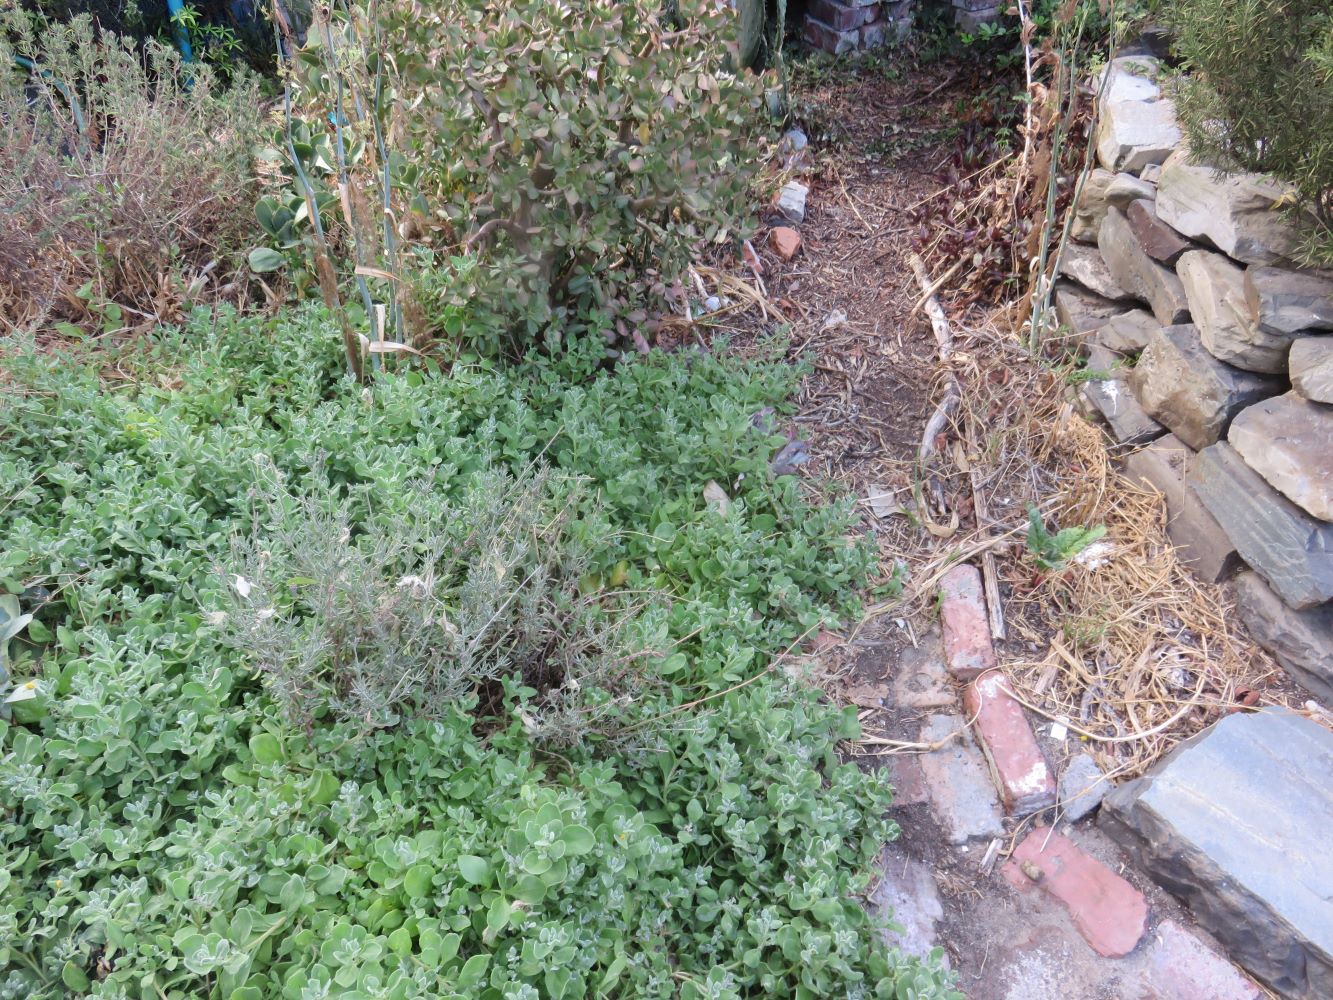 And below the wall, in the water catching hollow of the garden, I planted hardy native plants instead of the more tender European ones.